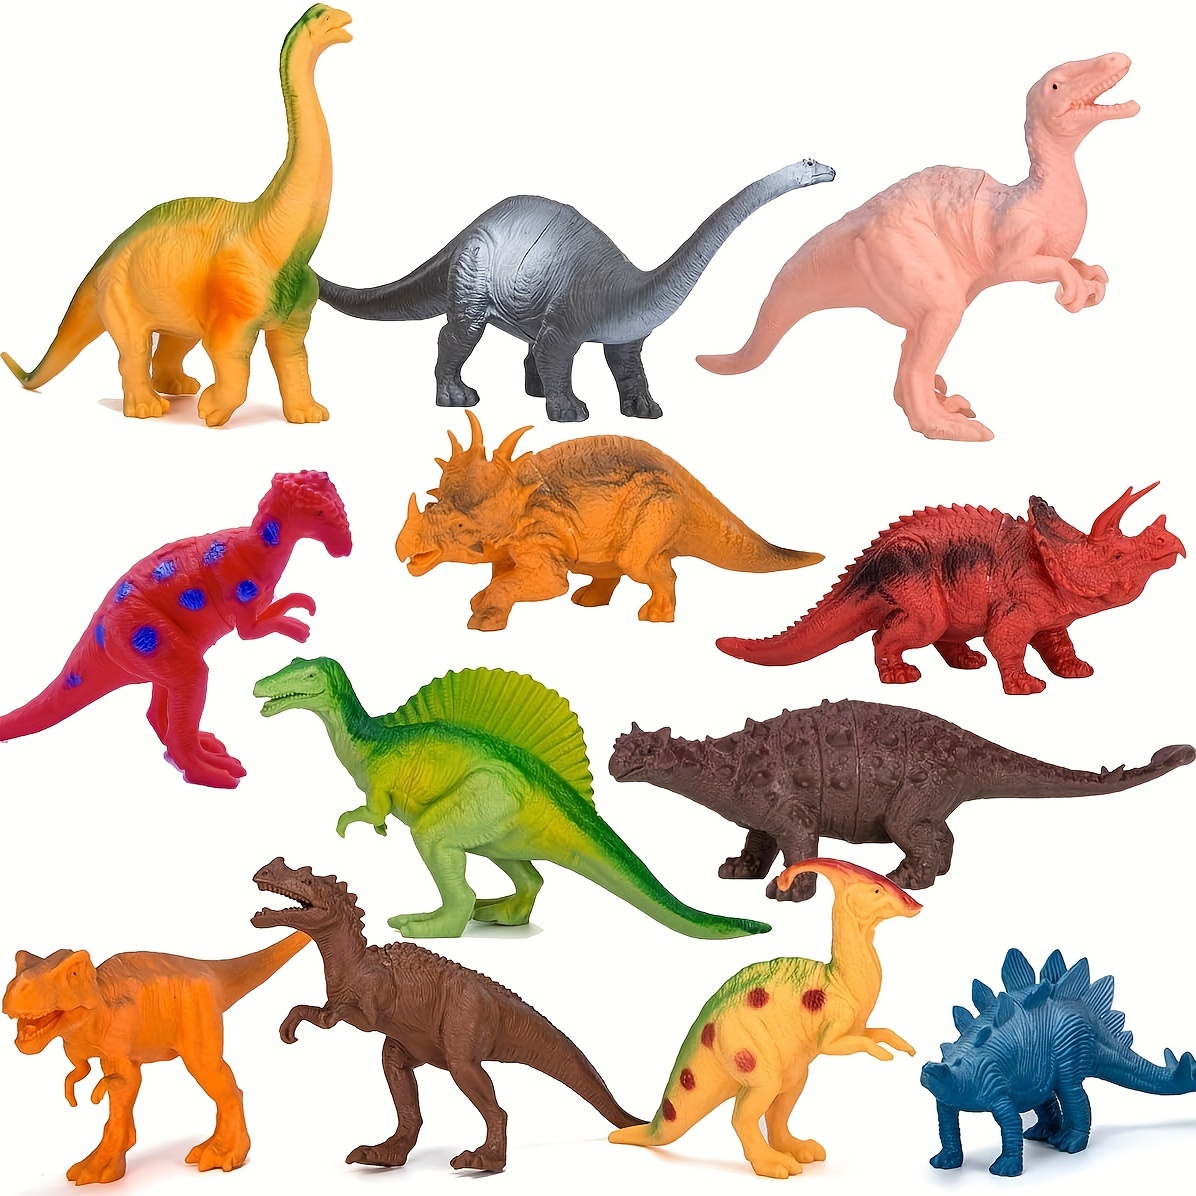 Dinosaur Toys for Kids Toys - 12 7-Inch Realistic Dinosaurs Figures with  Storage Box | Kids Dinosaur Toys | Toddler Dinosaur Toy | Dinosaur Toys for